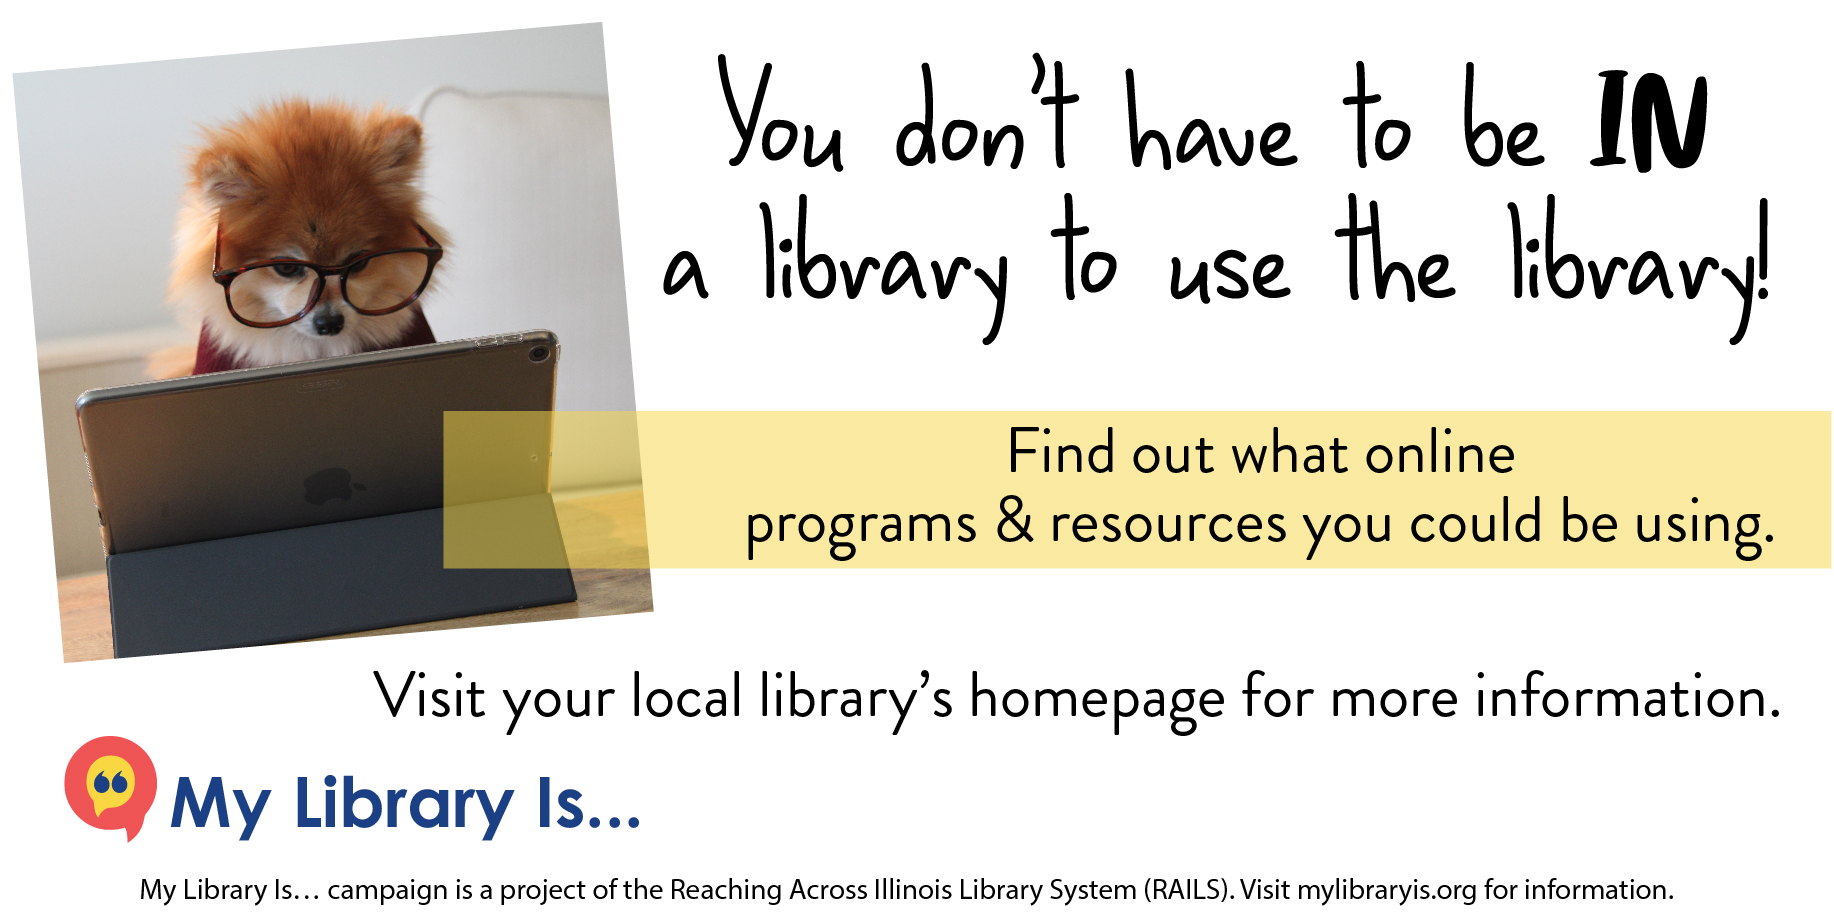 Image for Twitter. "You don't have to be IN a library to use the library! Find out what online programs & resources you could be using. Visit your local library's homepage for more information." Footer provides mylibraryis.org URL.